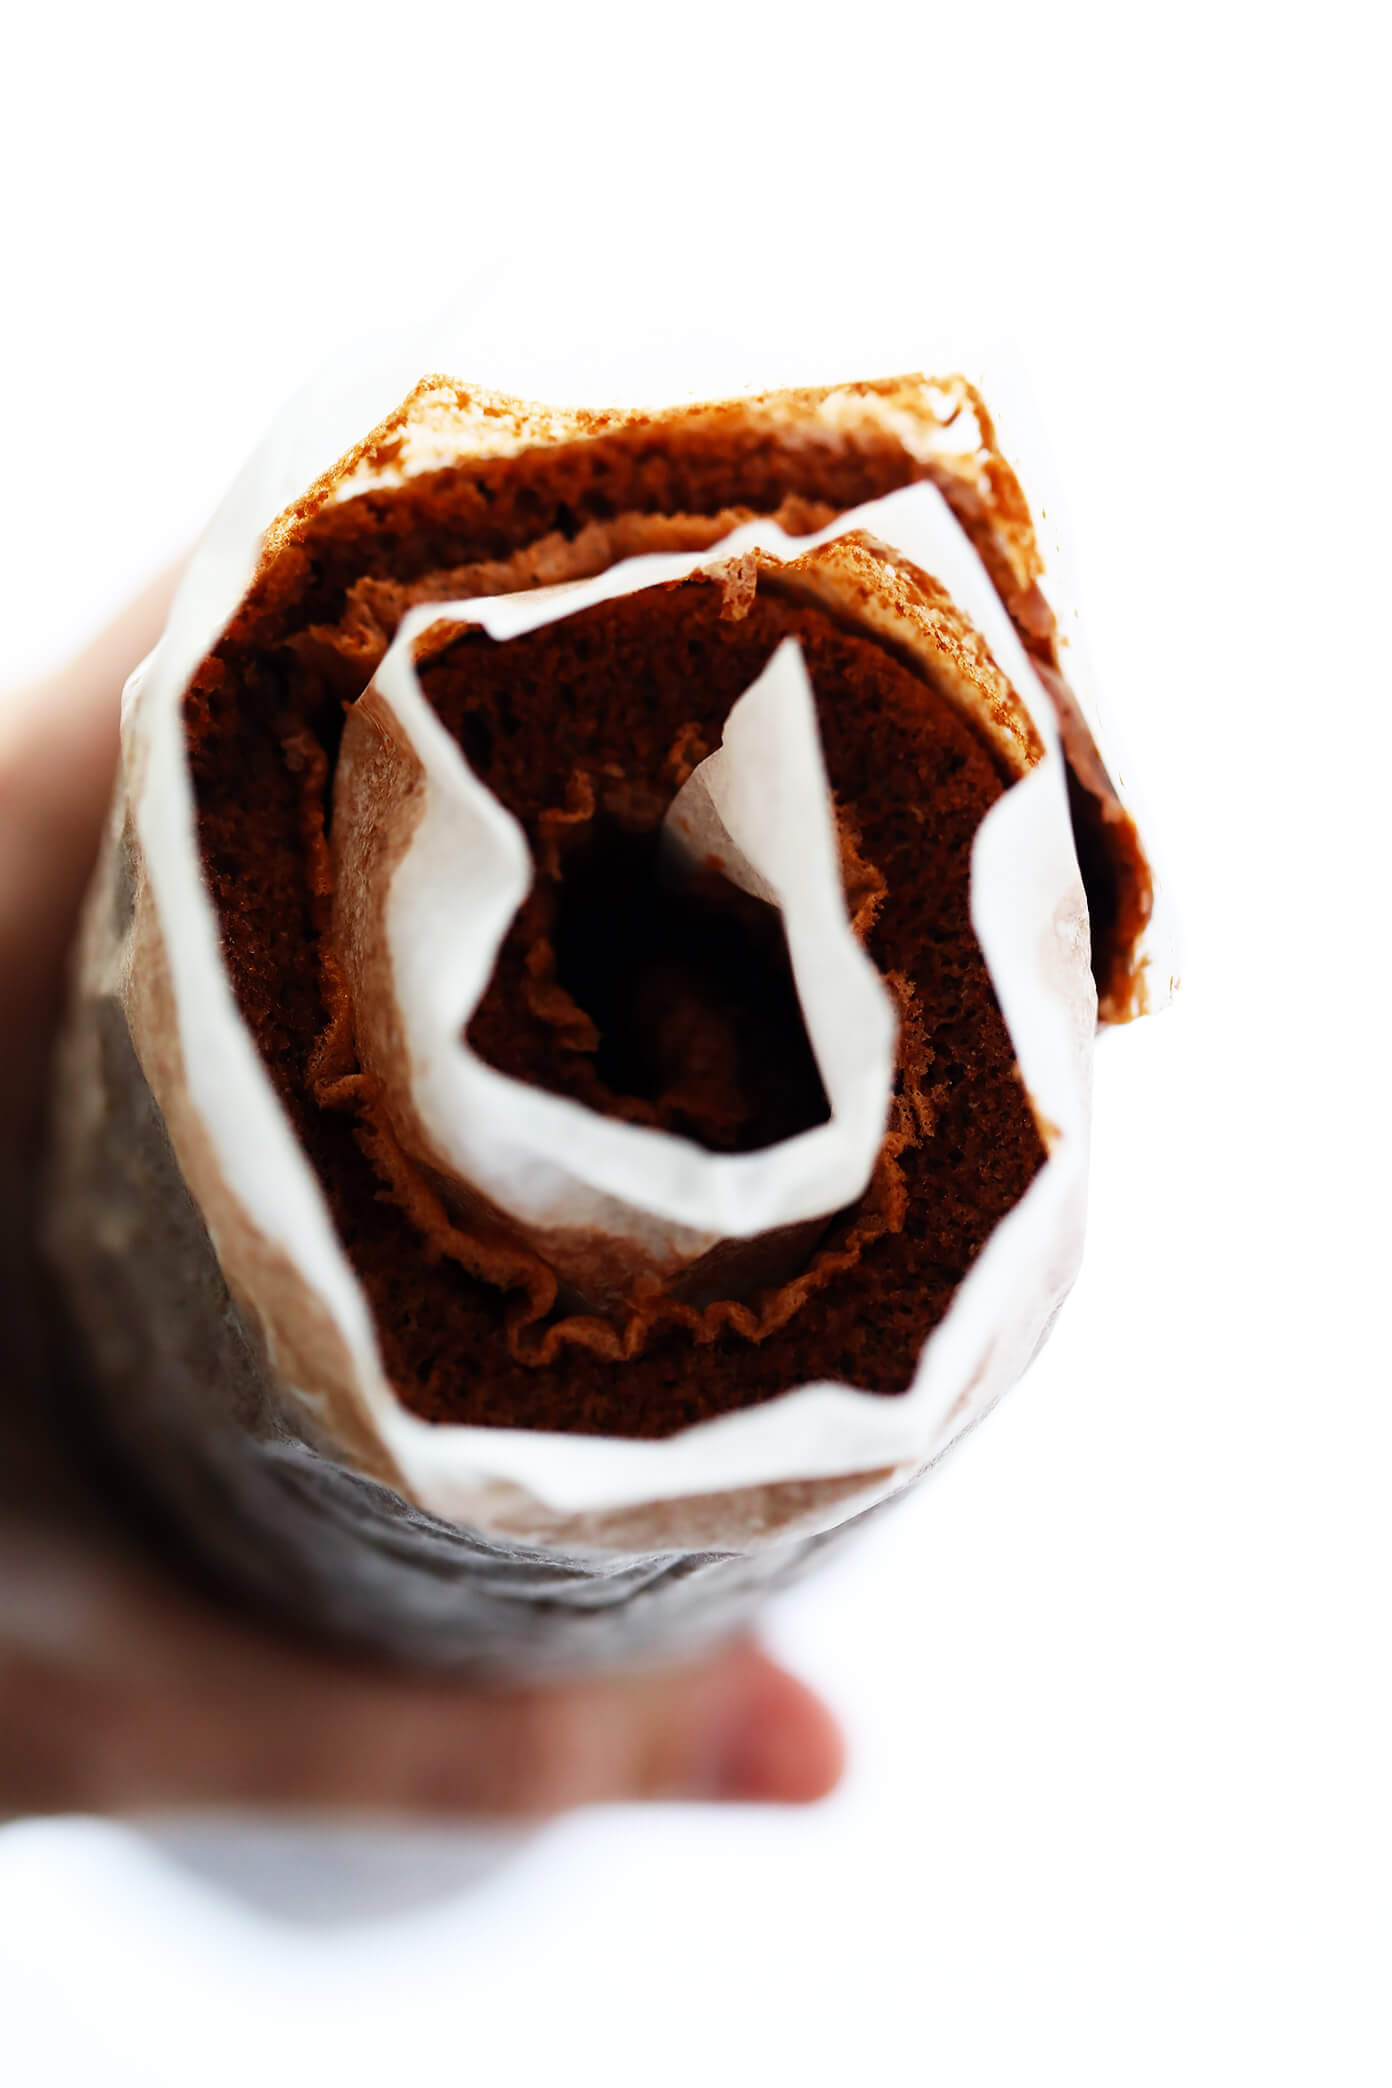 This amazing Chocolate Roll Recipe (a.k.a. "Chocolate Swiss Roll") is easy to customize with your favorite fillings (cream cheese is my fave!). Plus, it's also easy to make ahead and freeze. Perfect for holiday entertaining, and even giving away as gifts! | Gimme Some Oven #chocolate #cake #christmas #dessert